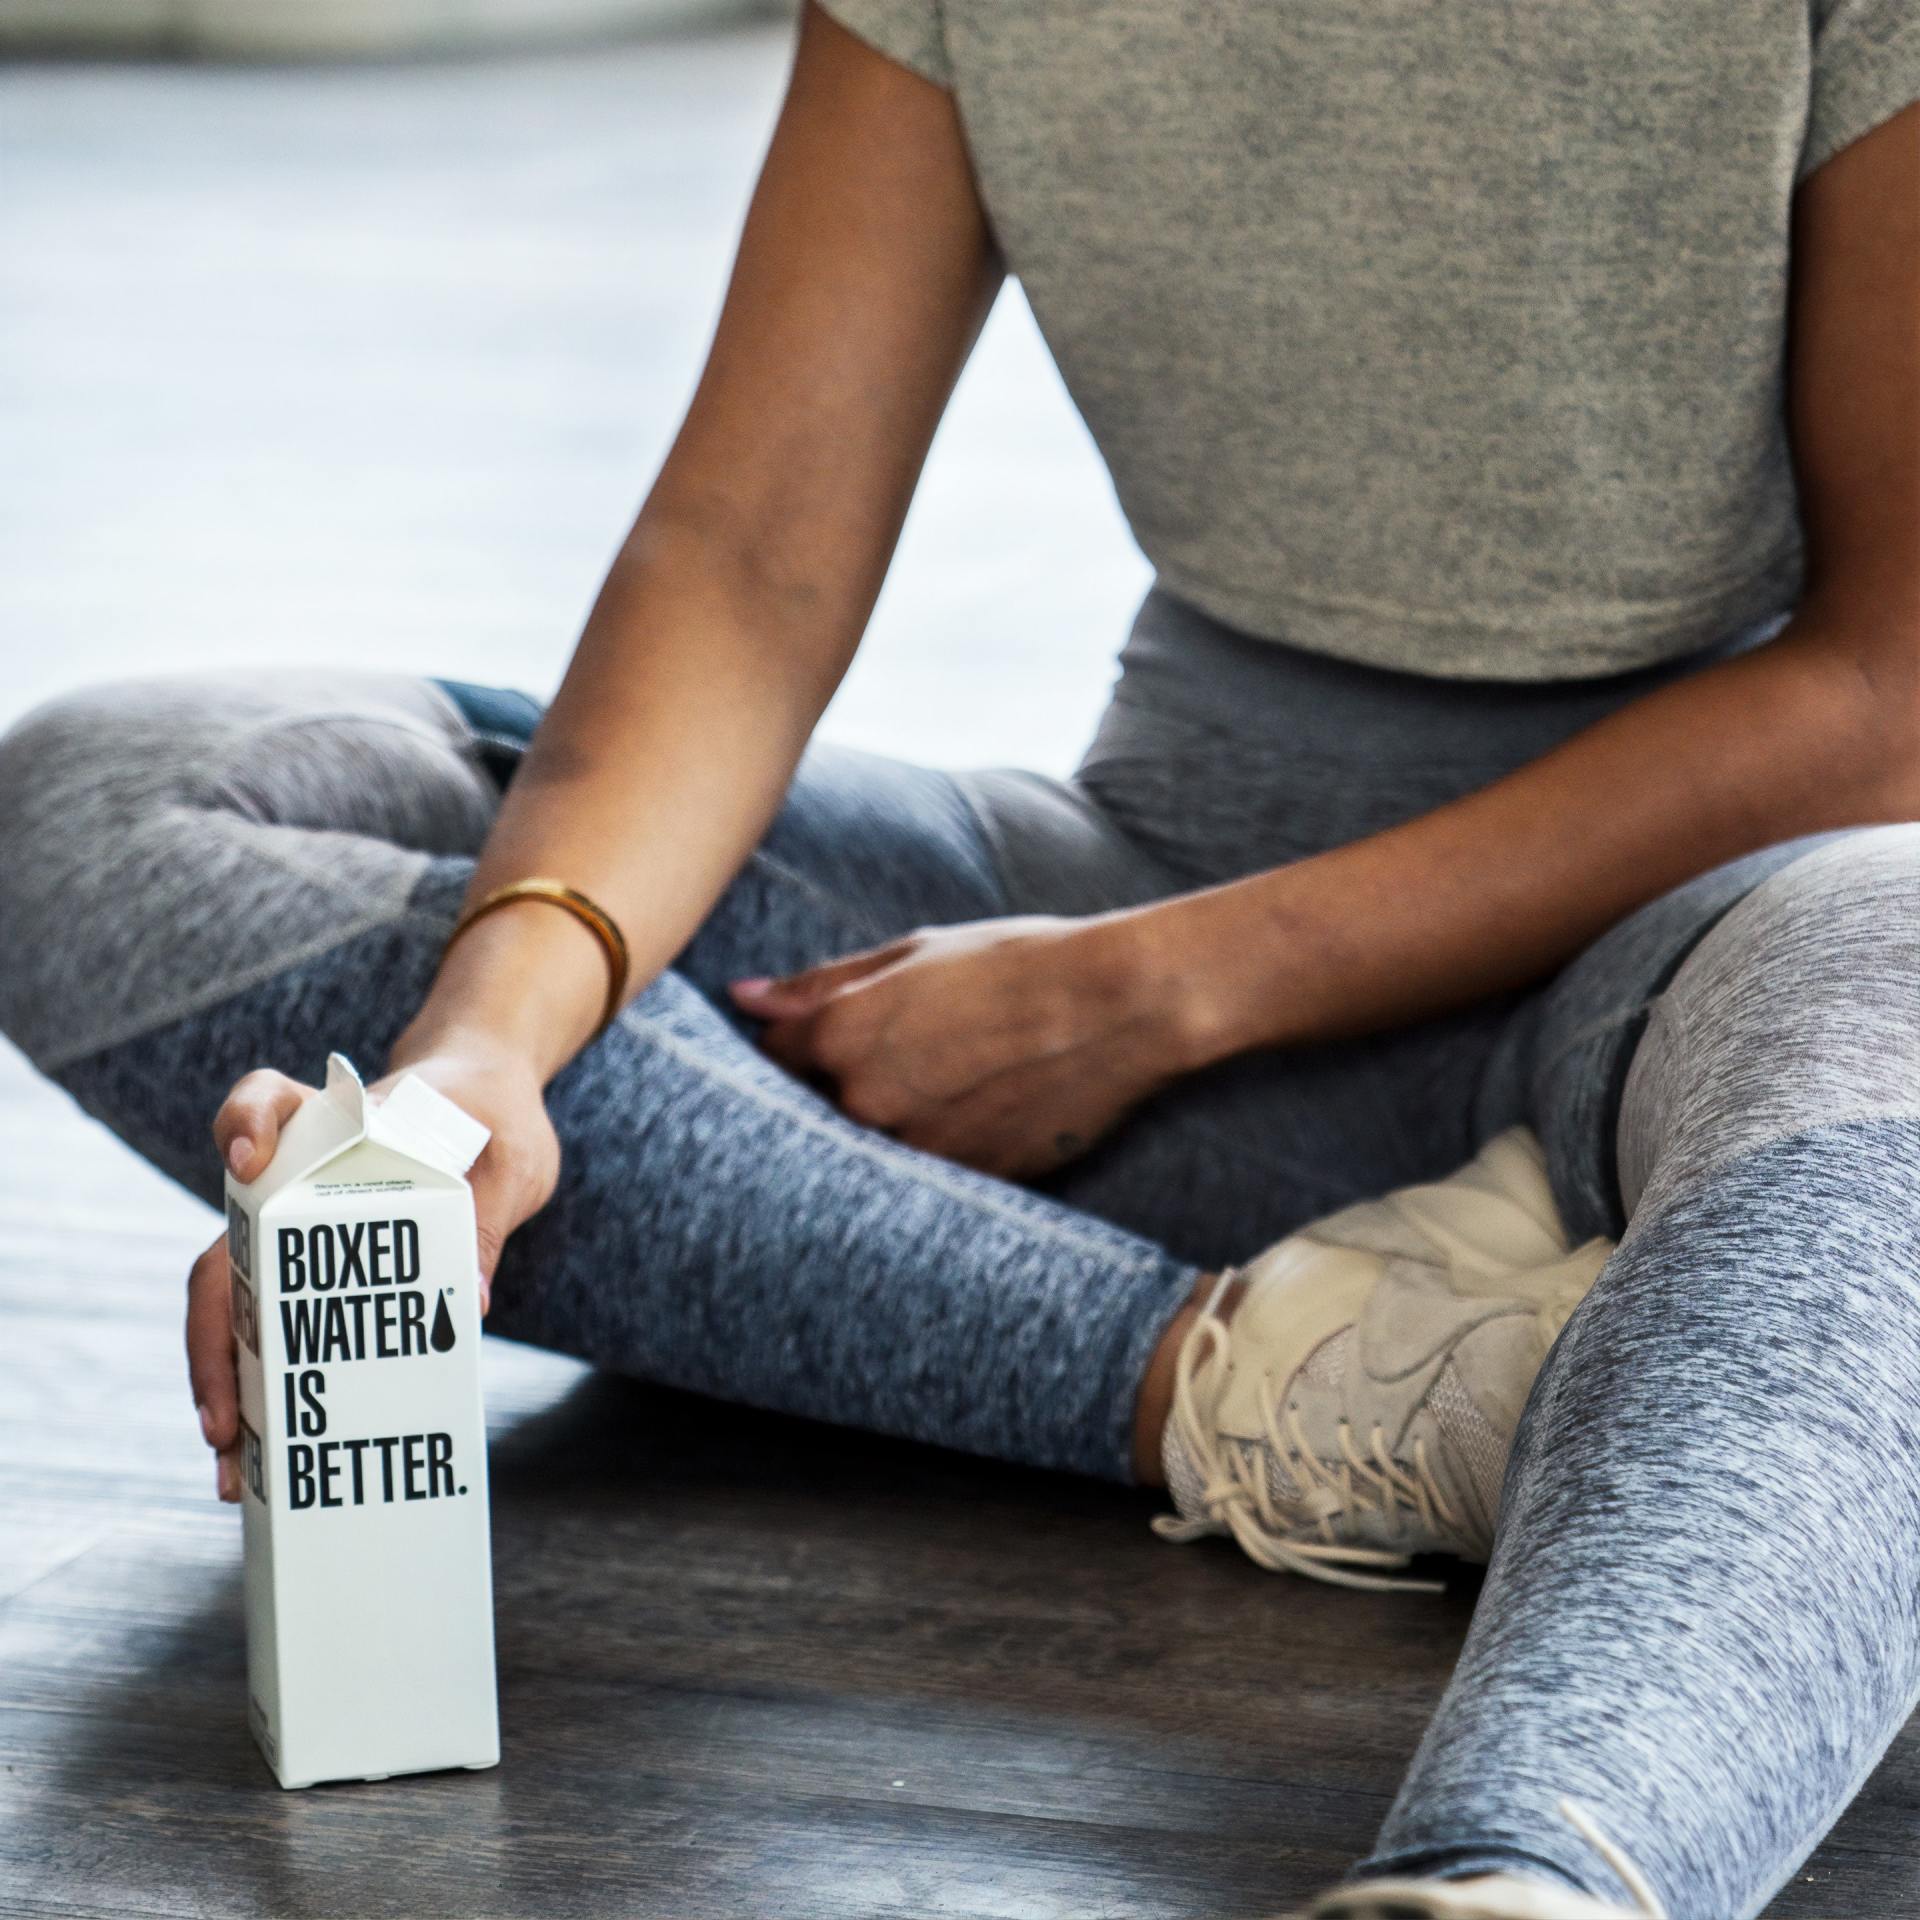 A woman is sitting on the floor holding a boxed water bottle